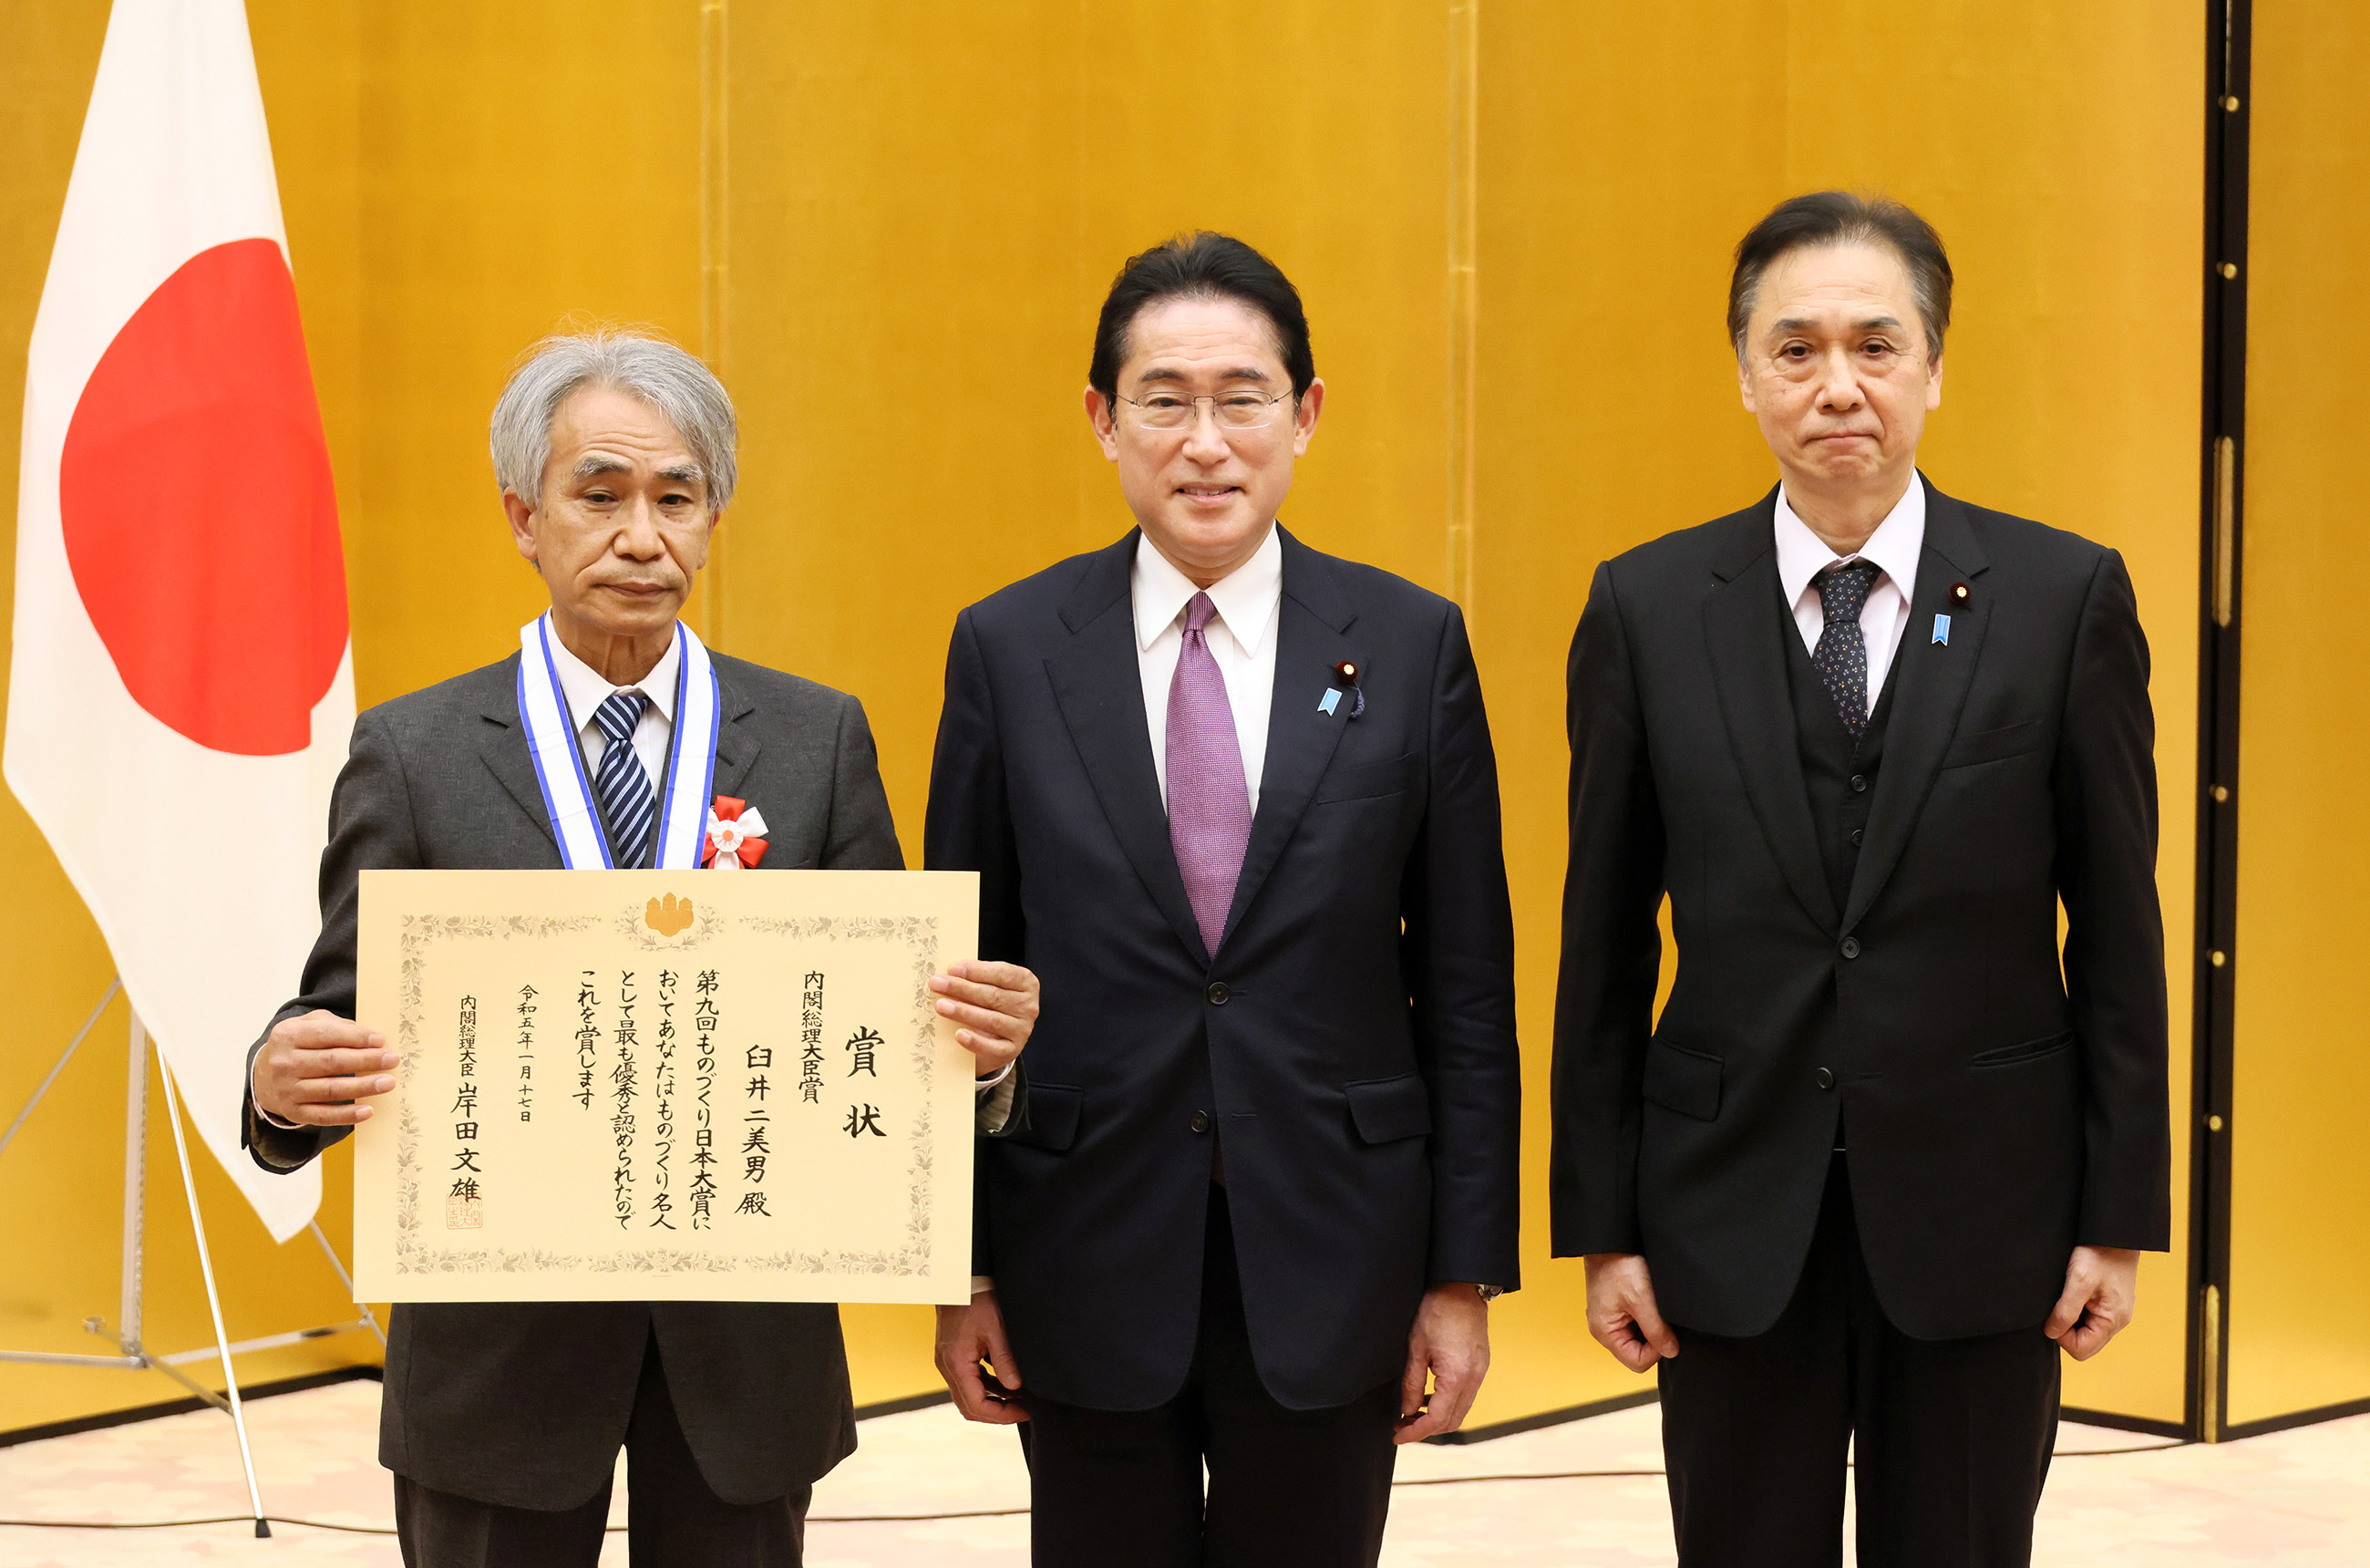 Commemorative photo session with award winners (6)